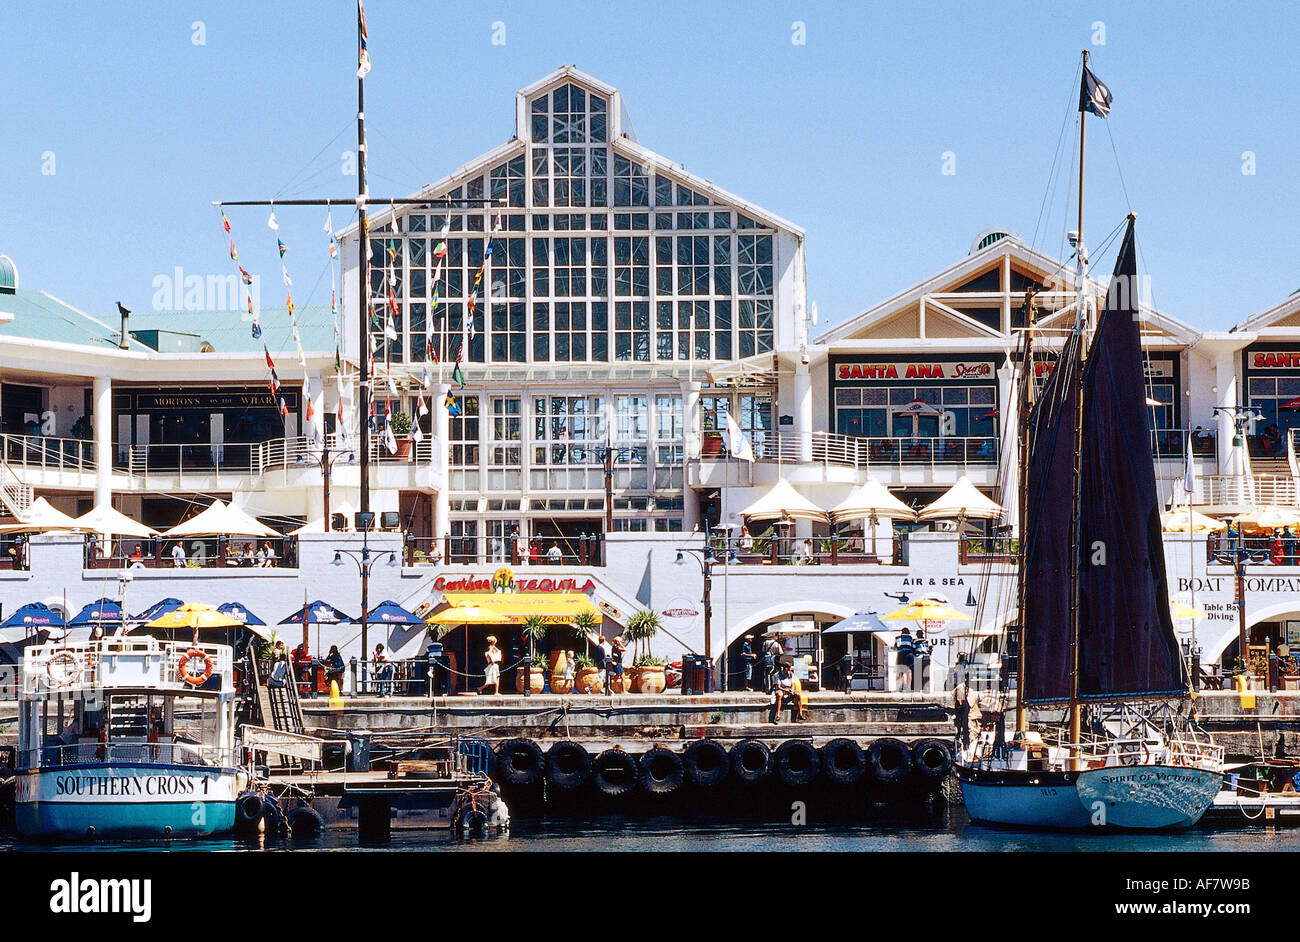 South Africa, Western Cape, Cape Town, Victoria and Alfred Waterfront,  Victoria Wharf Shopping Centre Stock Photo - Alamy